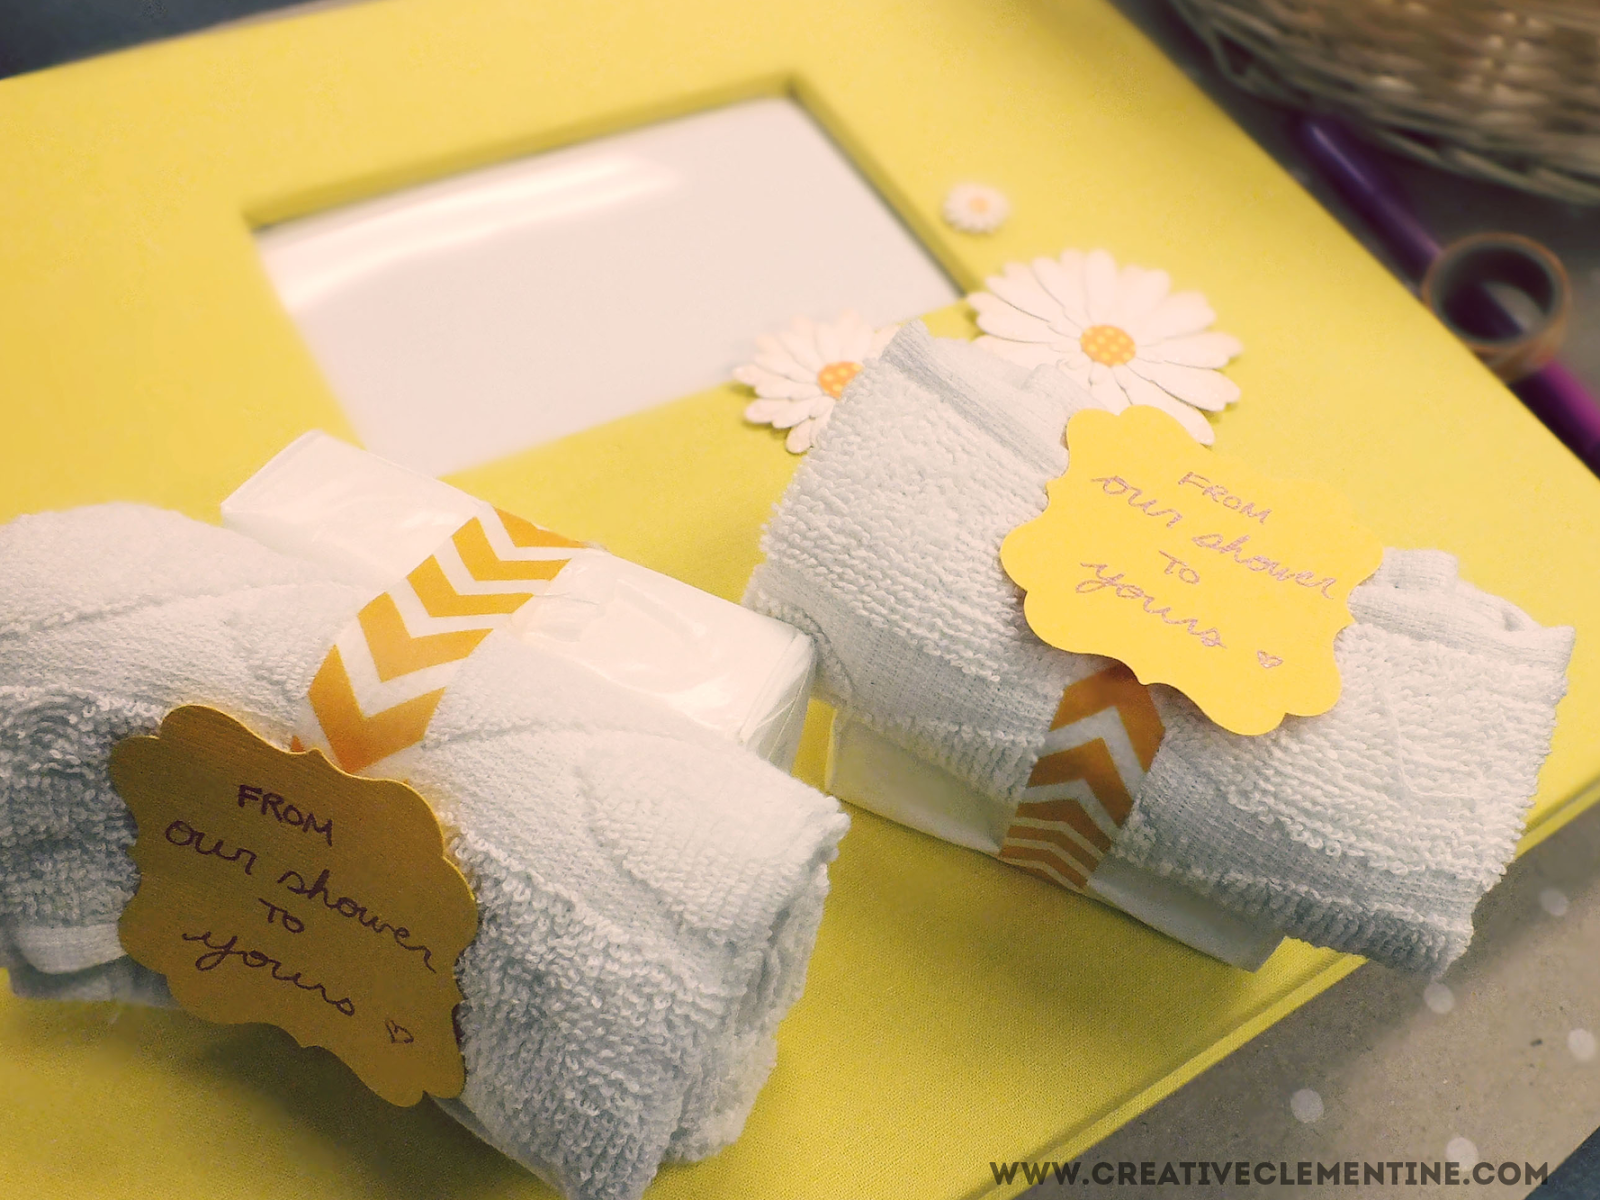 Baby Shower Favours on the Cheap via Creative Clementine. "From Our Shower to Yours" soap and cloth set.